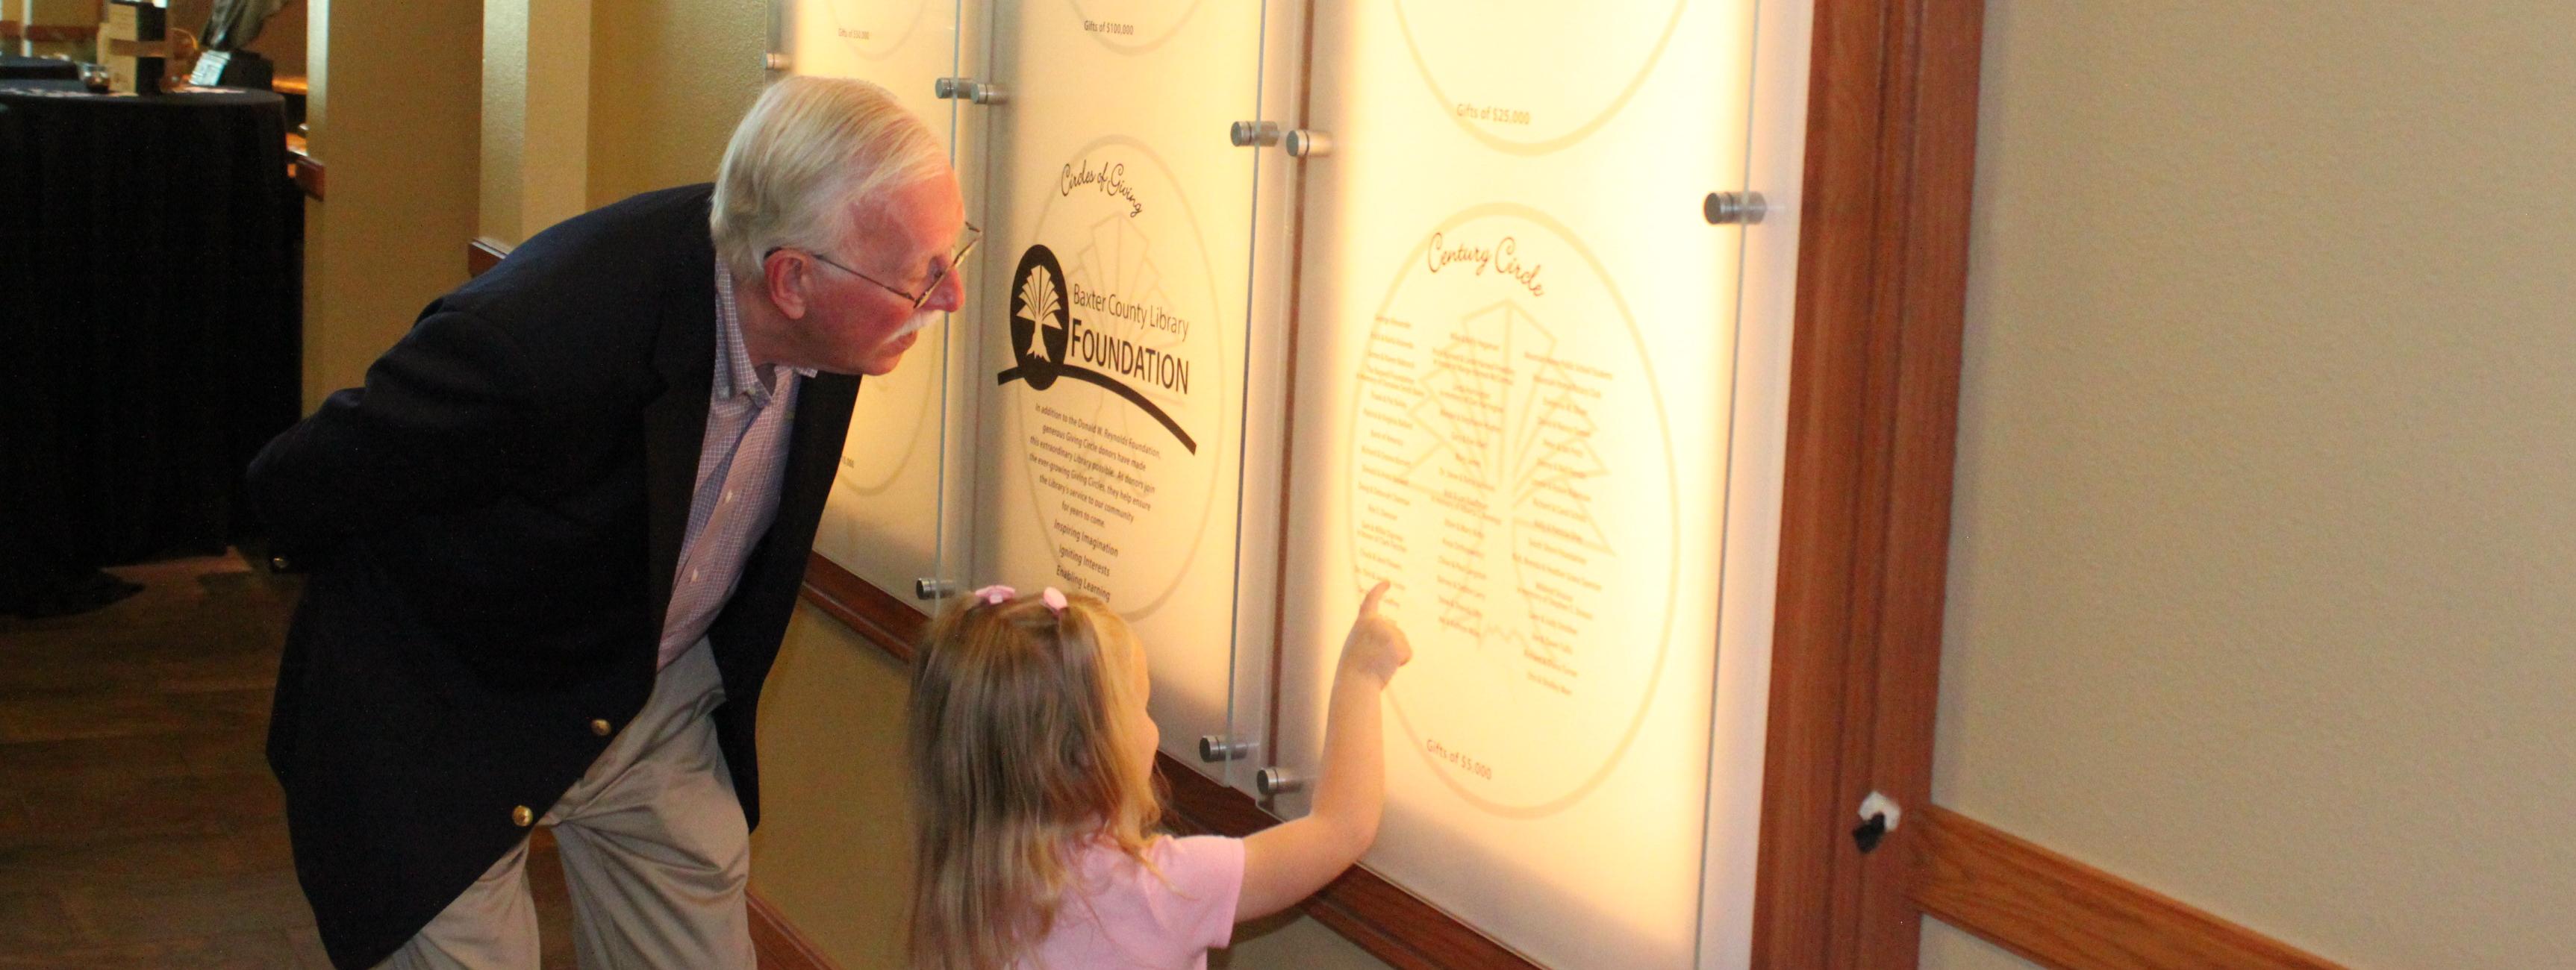 Older man and young girl at donor wall